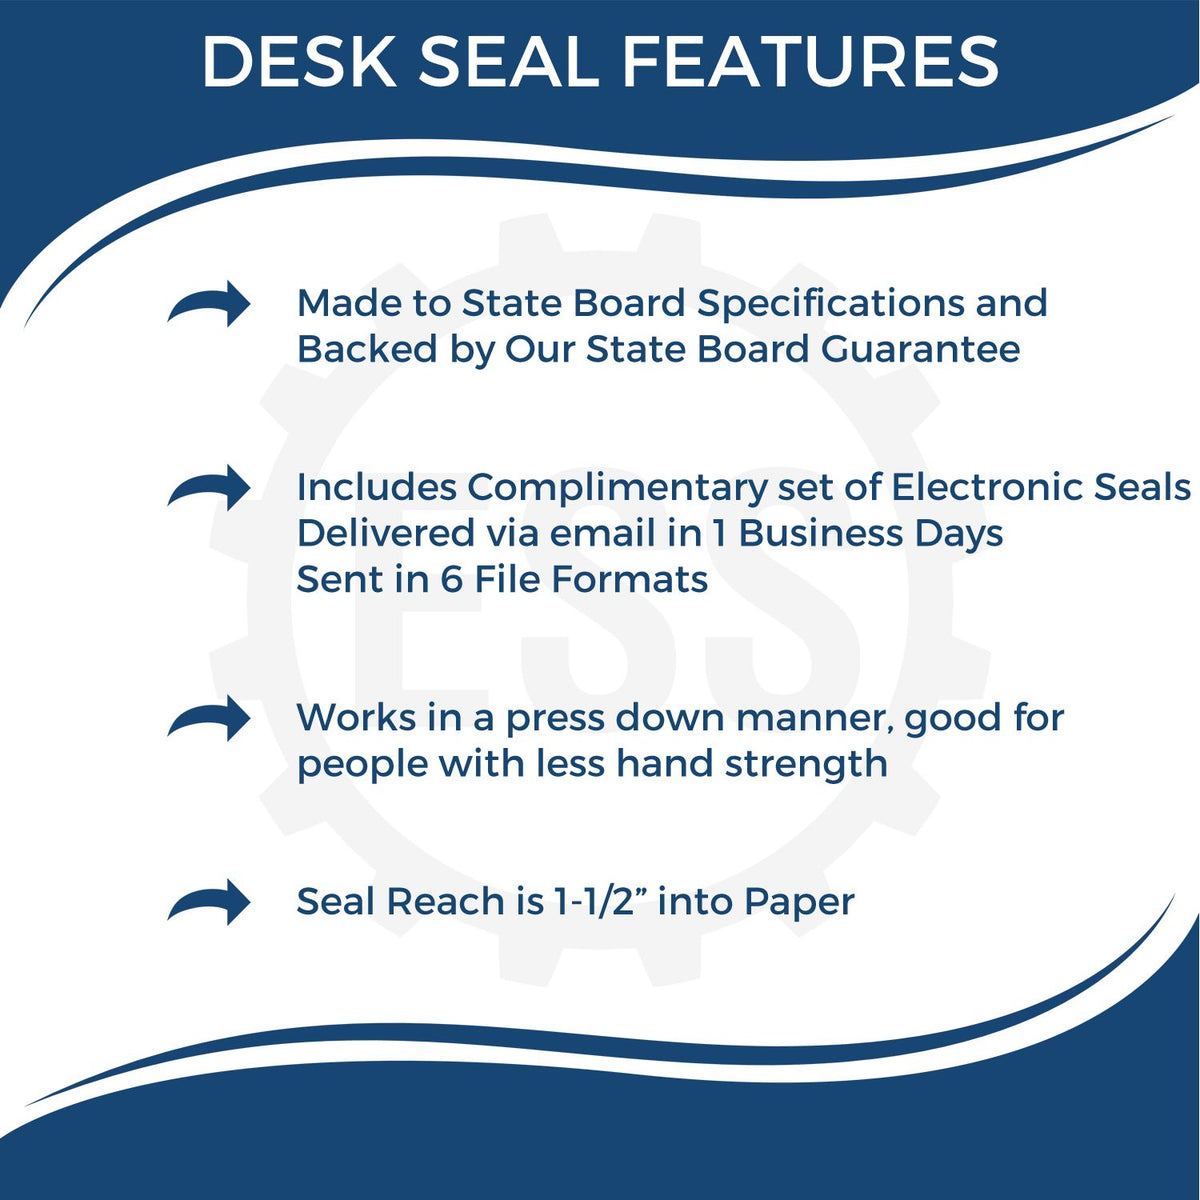 A picture of an infographic highlighting the selling points for the New Hampshire Desk Architect Embossing Seal